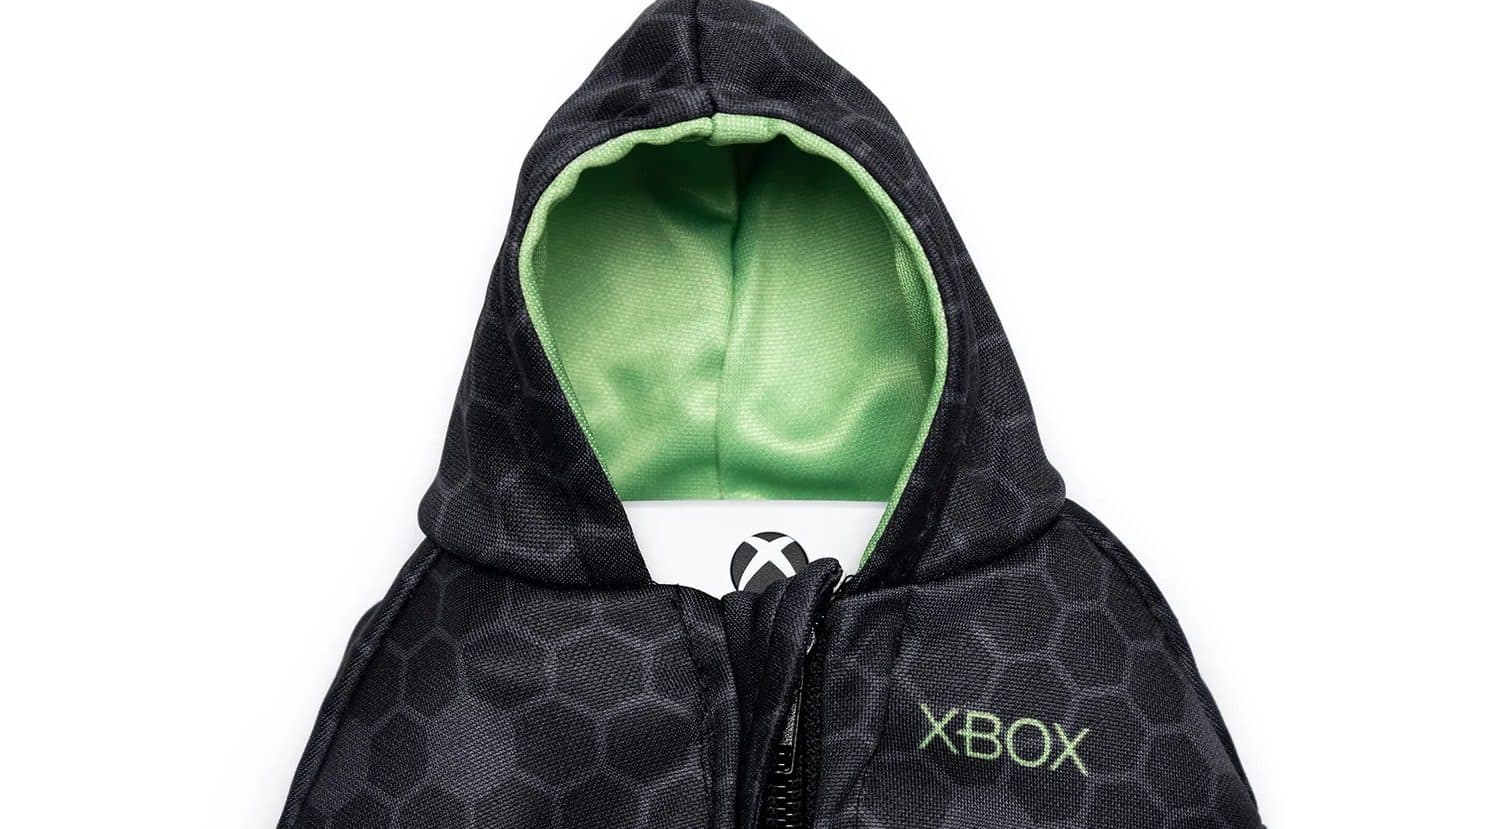 Microsoft is selling mini hoody jackets for your Xbox controllers